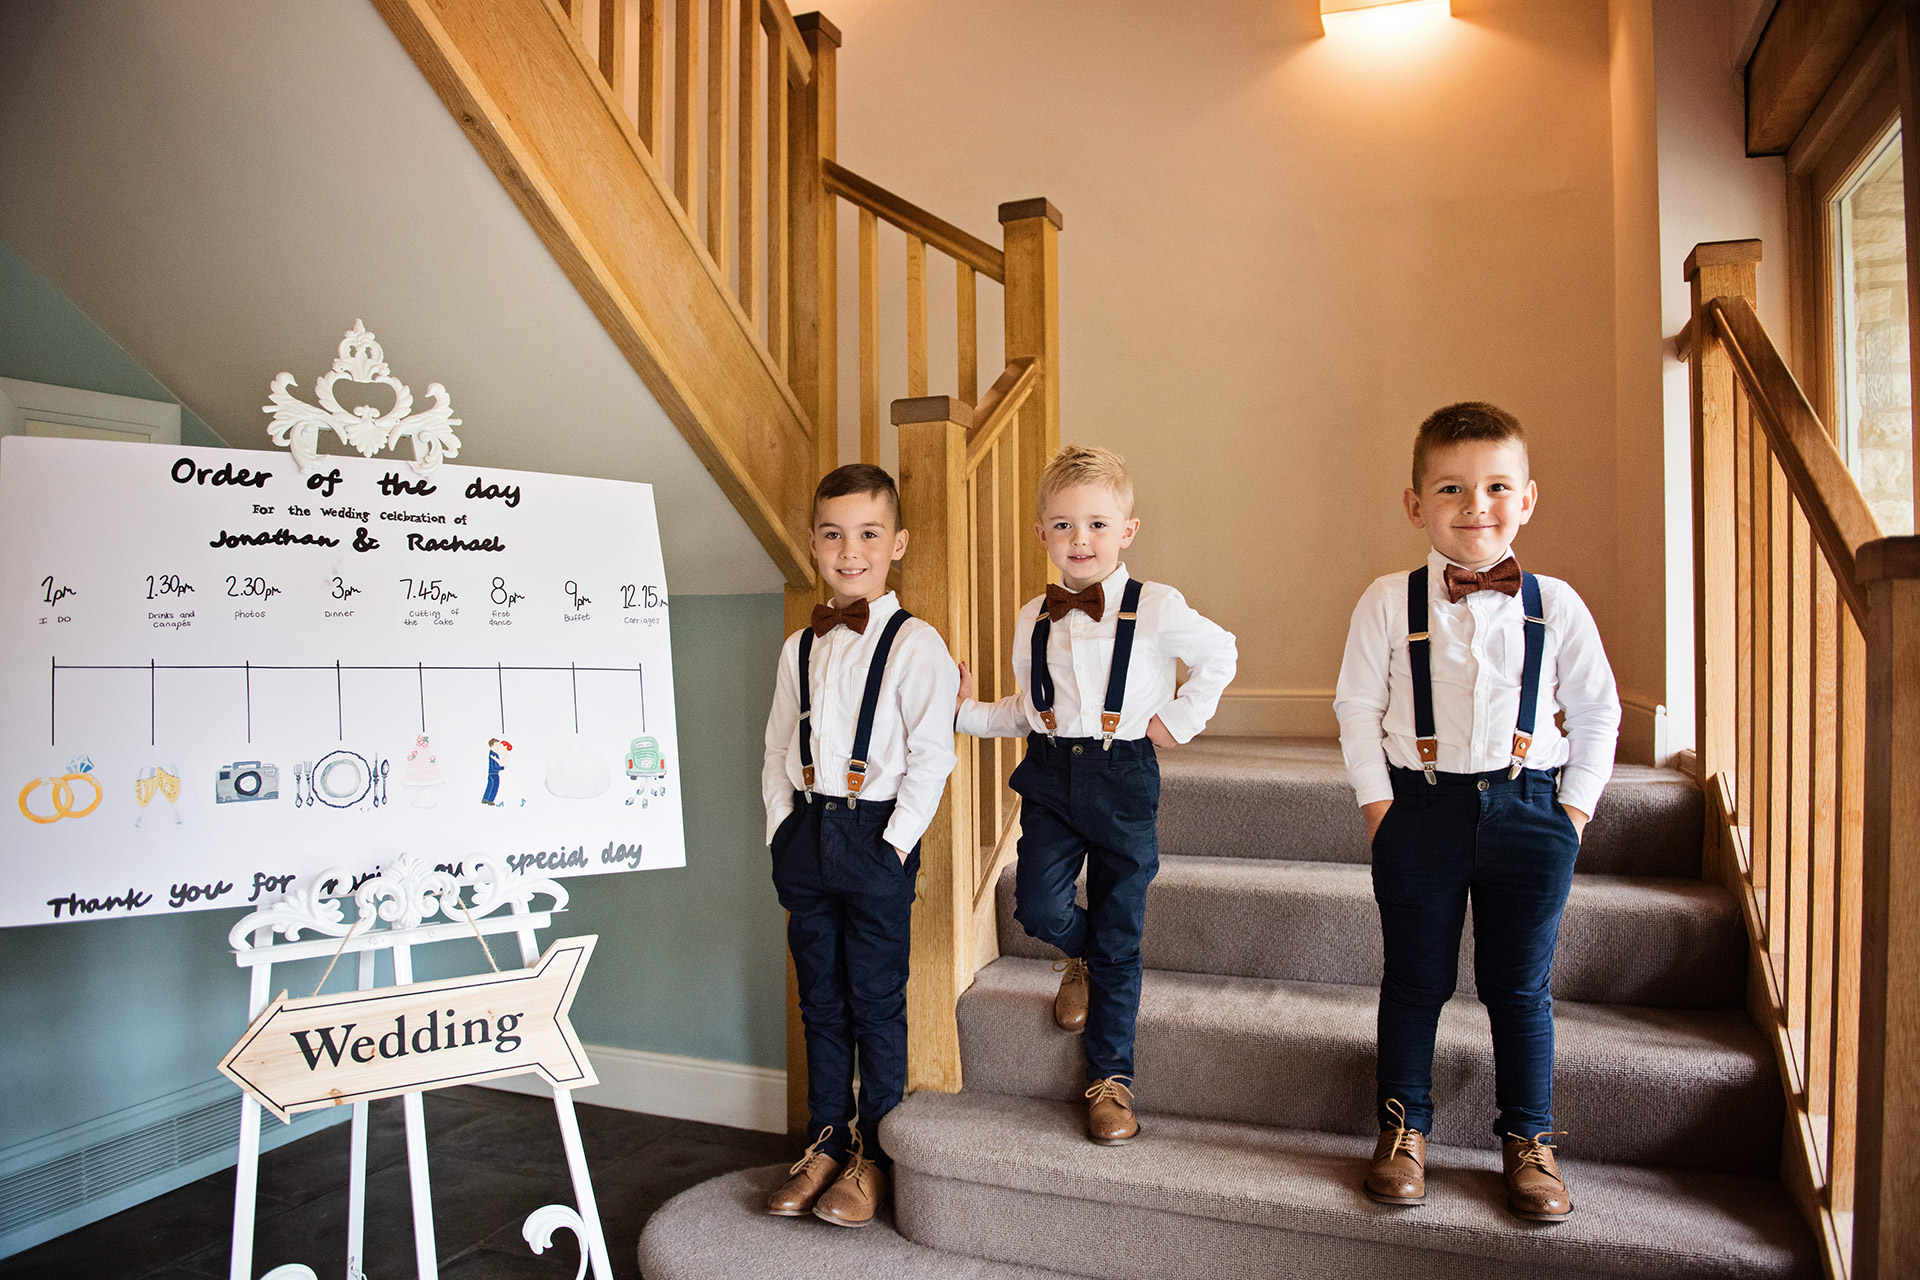 Page boys welcoming with cheeky smiles and dapper clothes